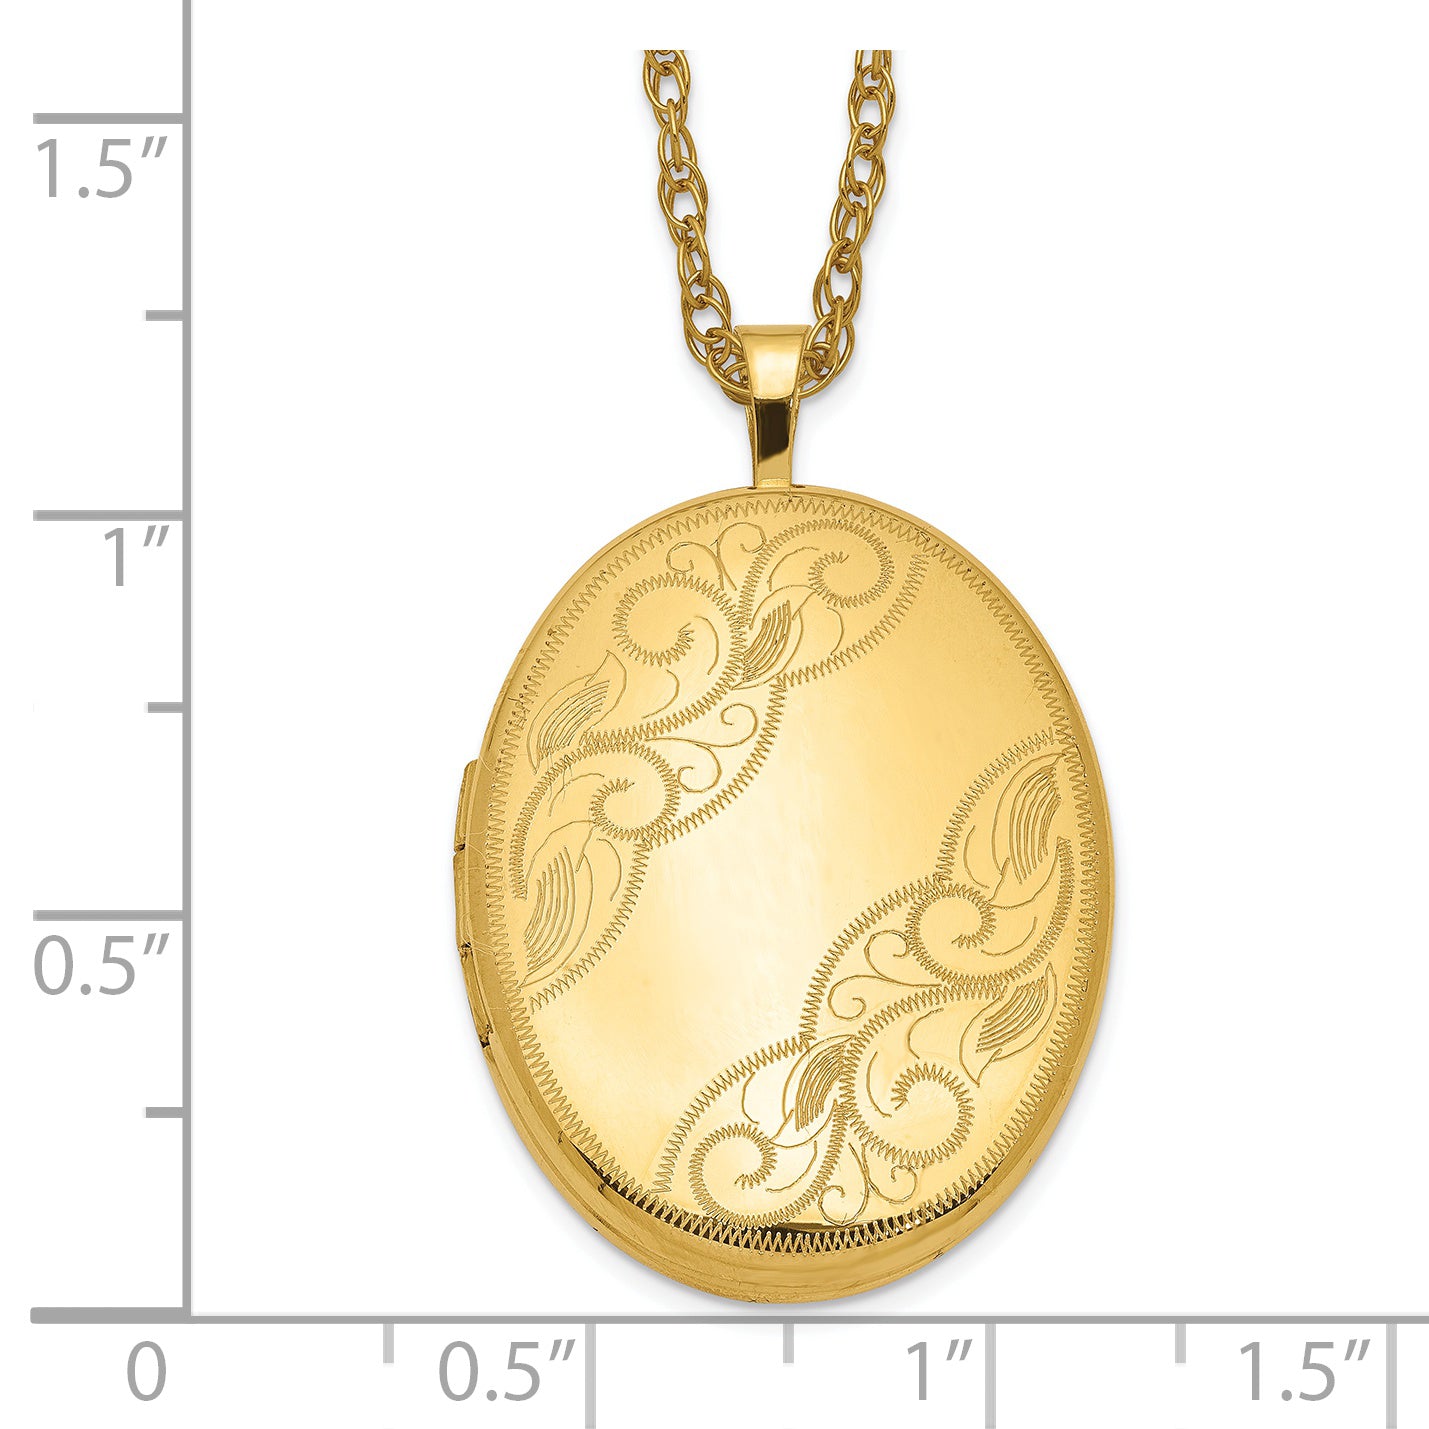 1/20 Gold Filled 26mm Swirled Oval Locket Necklace